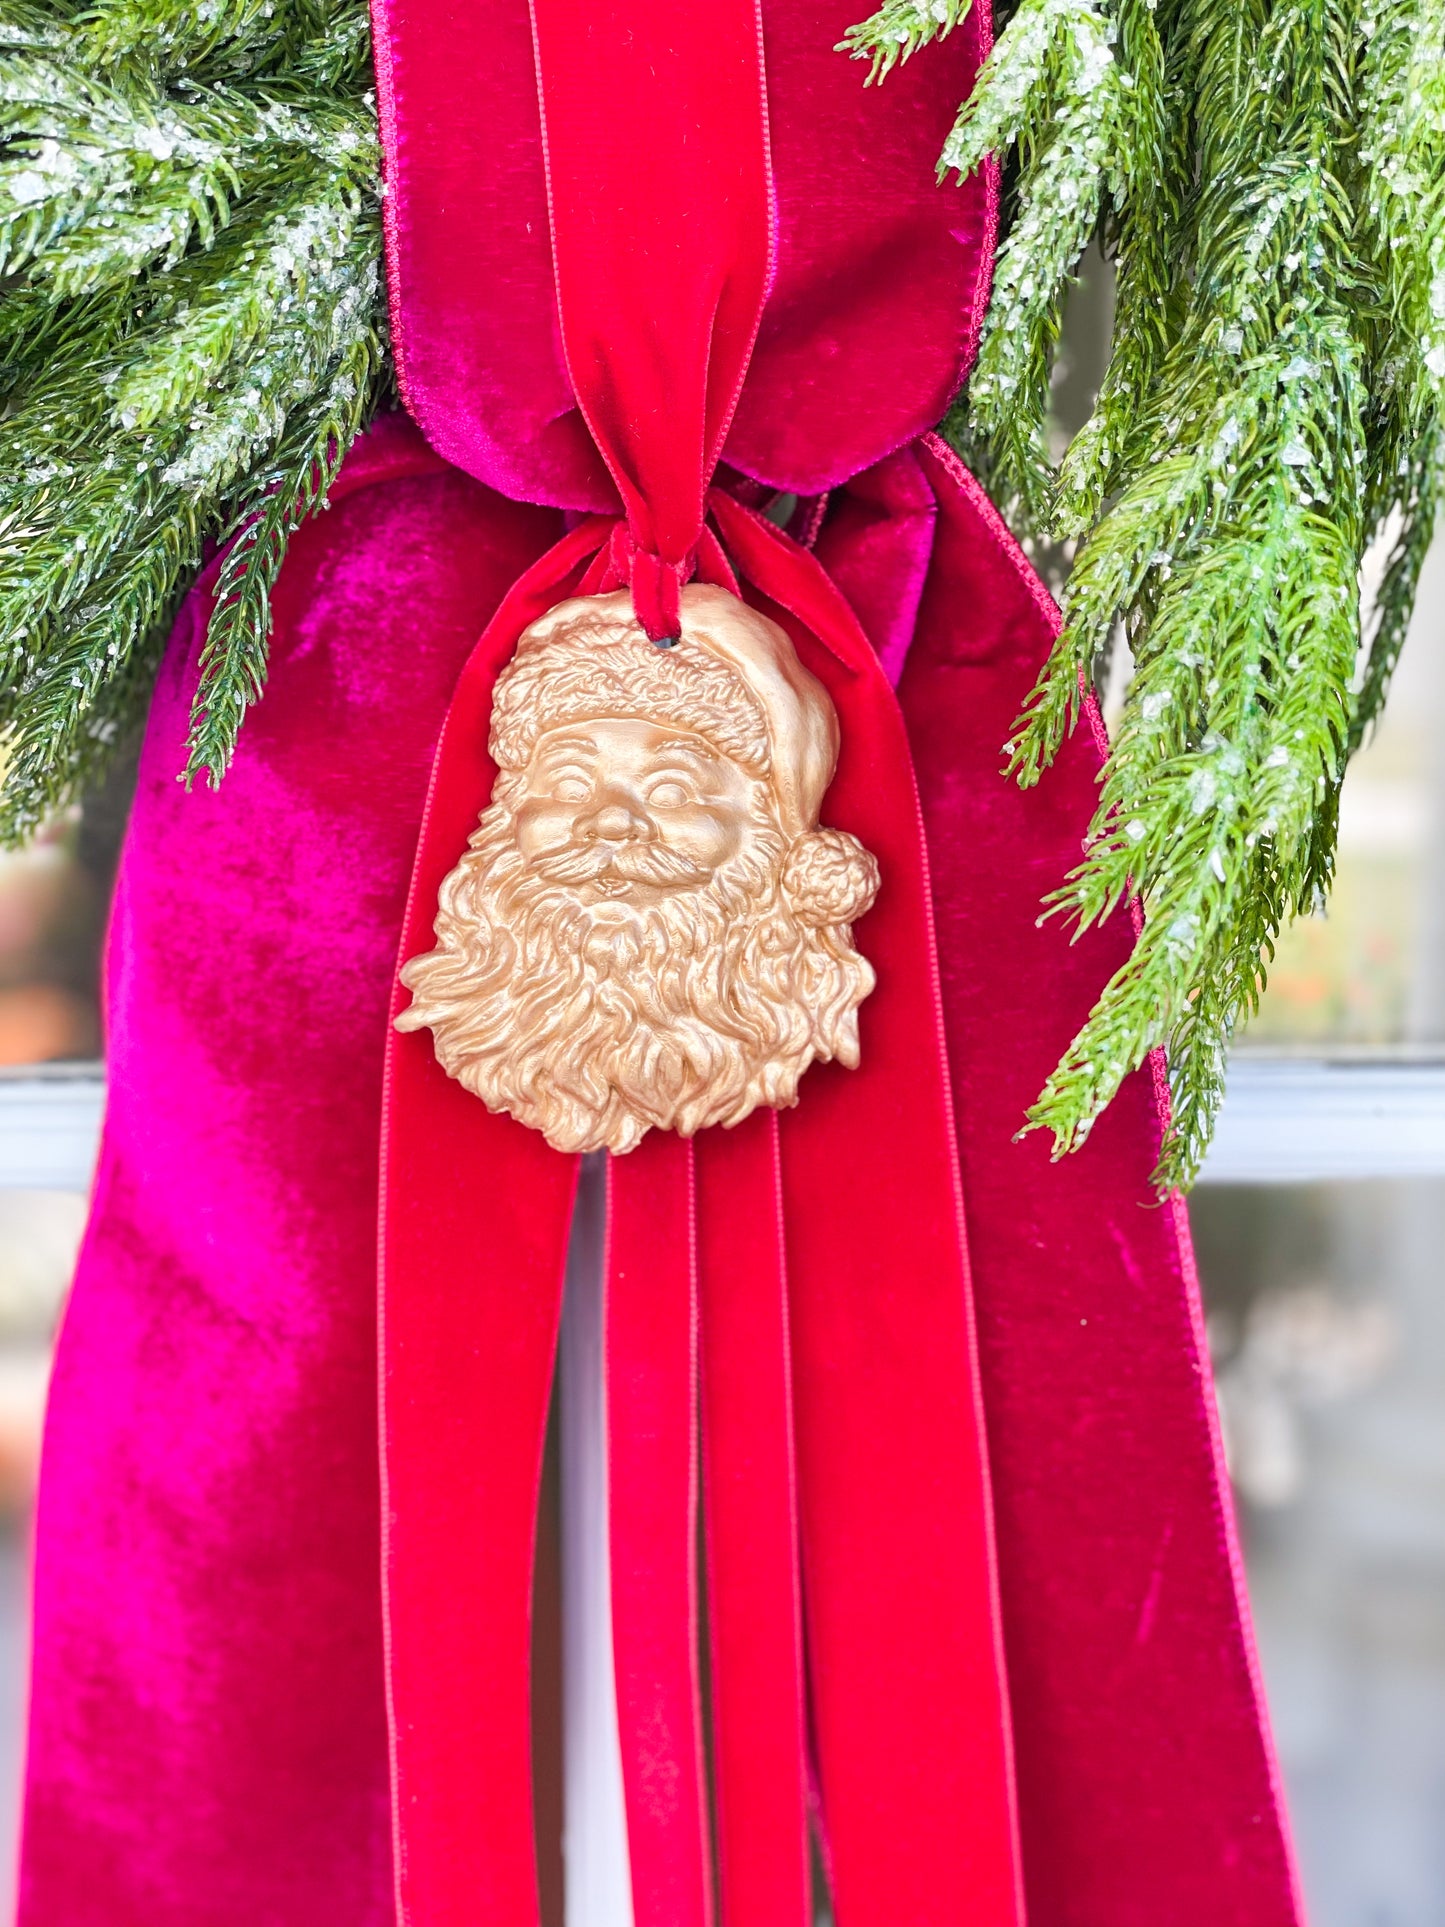 The Hot Pink Believe Iced Fir Pine Wreath With Sash And Santa